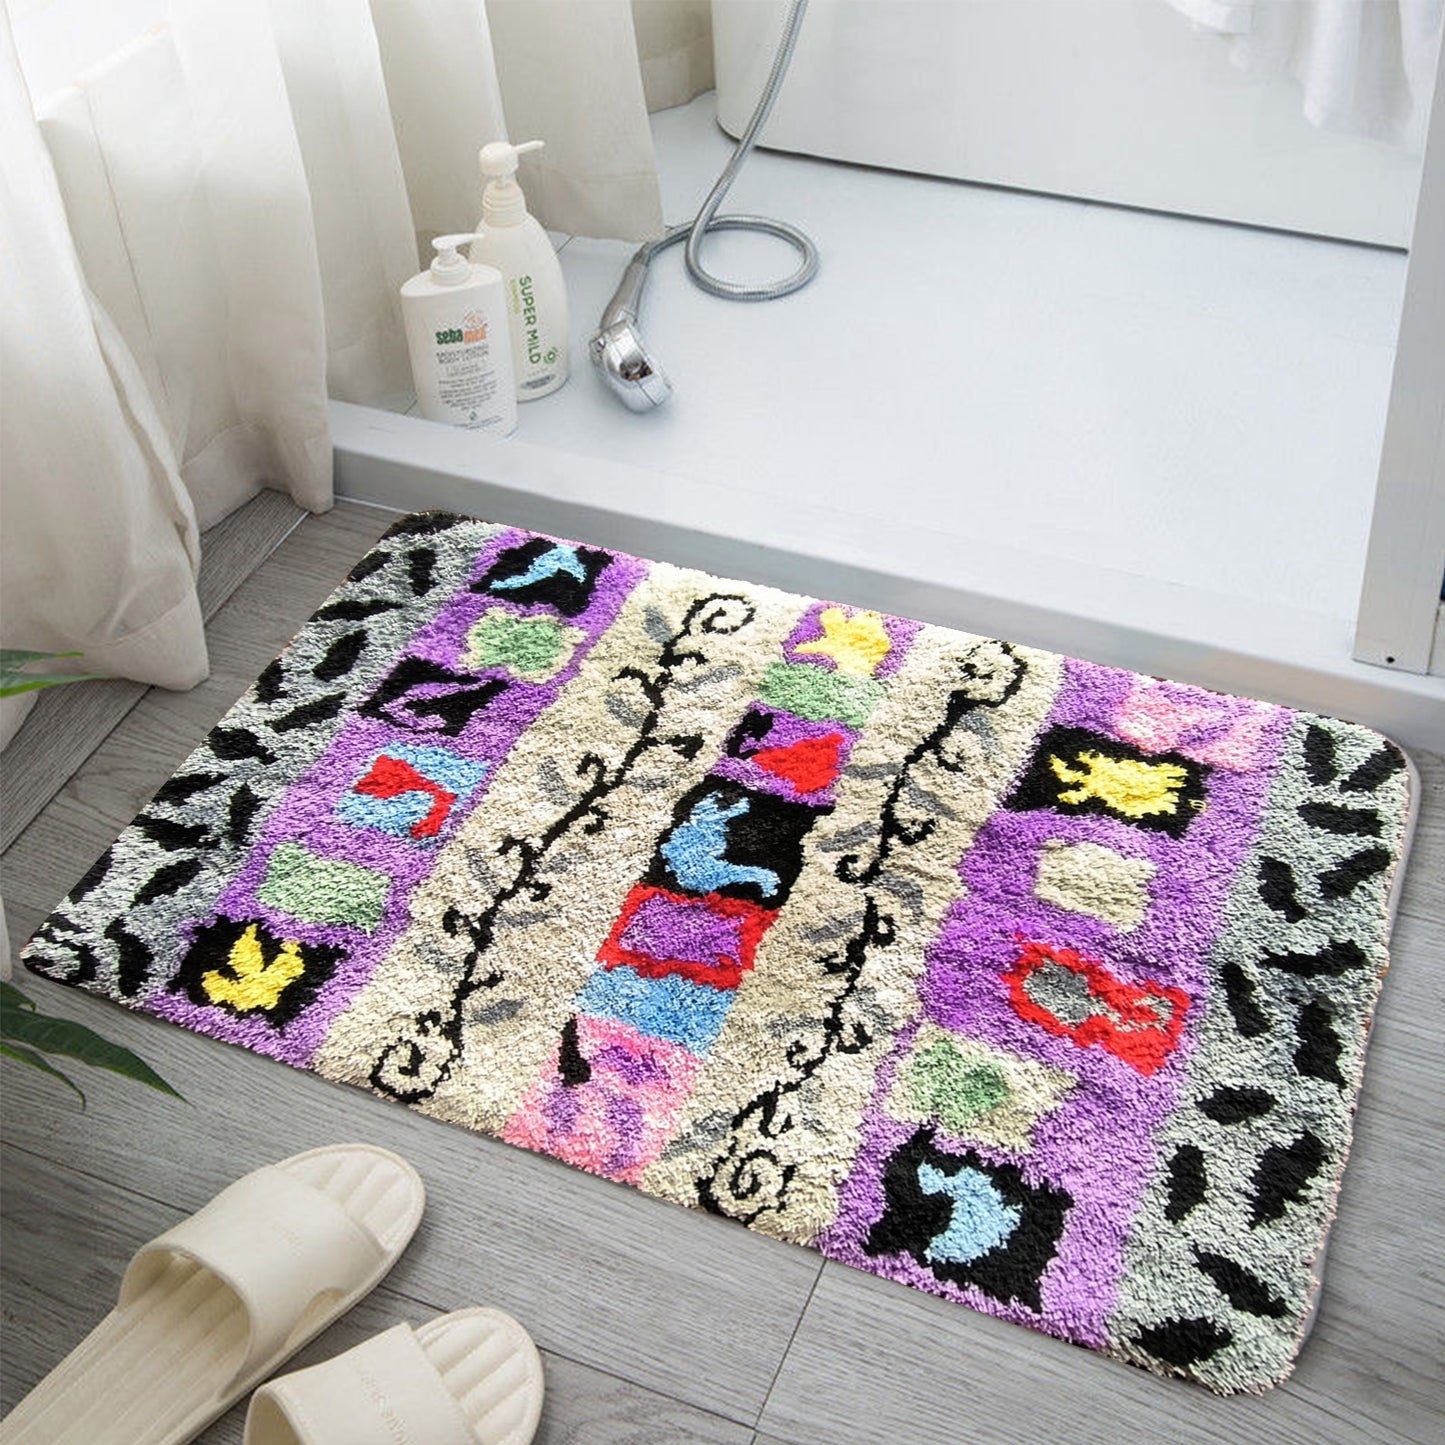 Feblilac Gray and Purple Striped Vines Tufted Bath Mat by Liz Gamberg Studio from US